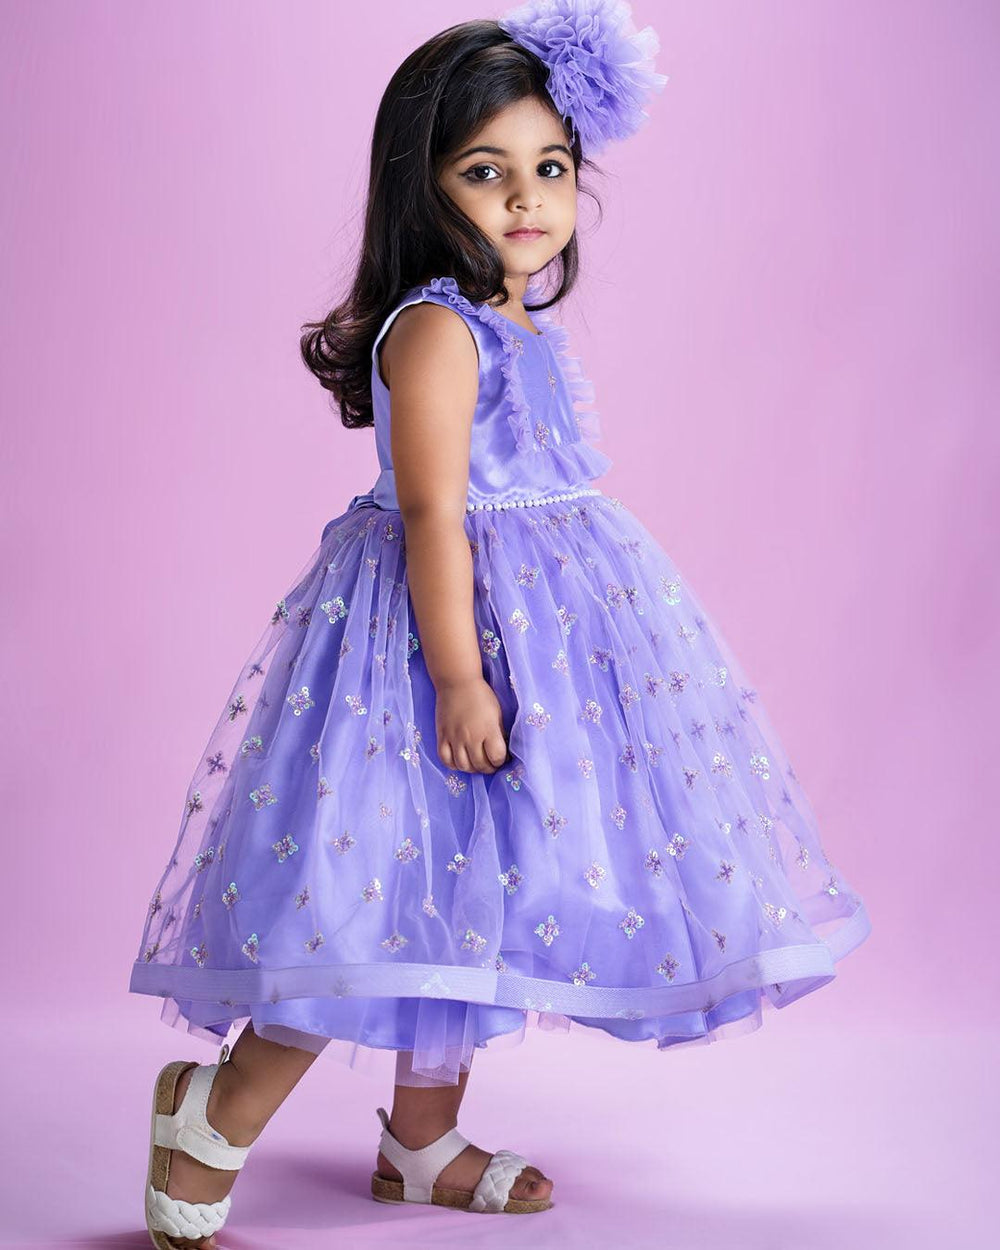 Lavender Shade Sequins Embroidery Ruffles Flarred Partywear Frock
Material: Lavender shade mono nylon sequins embroidery soft net fabric is used for the bottom of the skirt. Yoke portion is designed with same colour with ruffles o